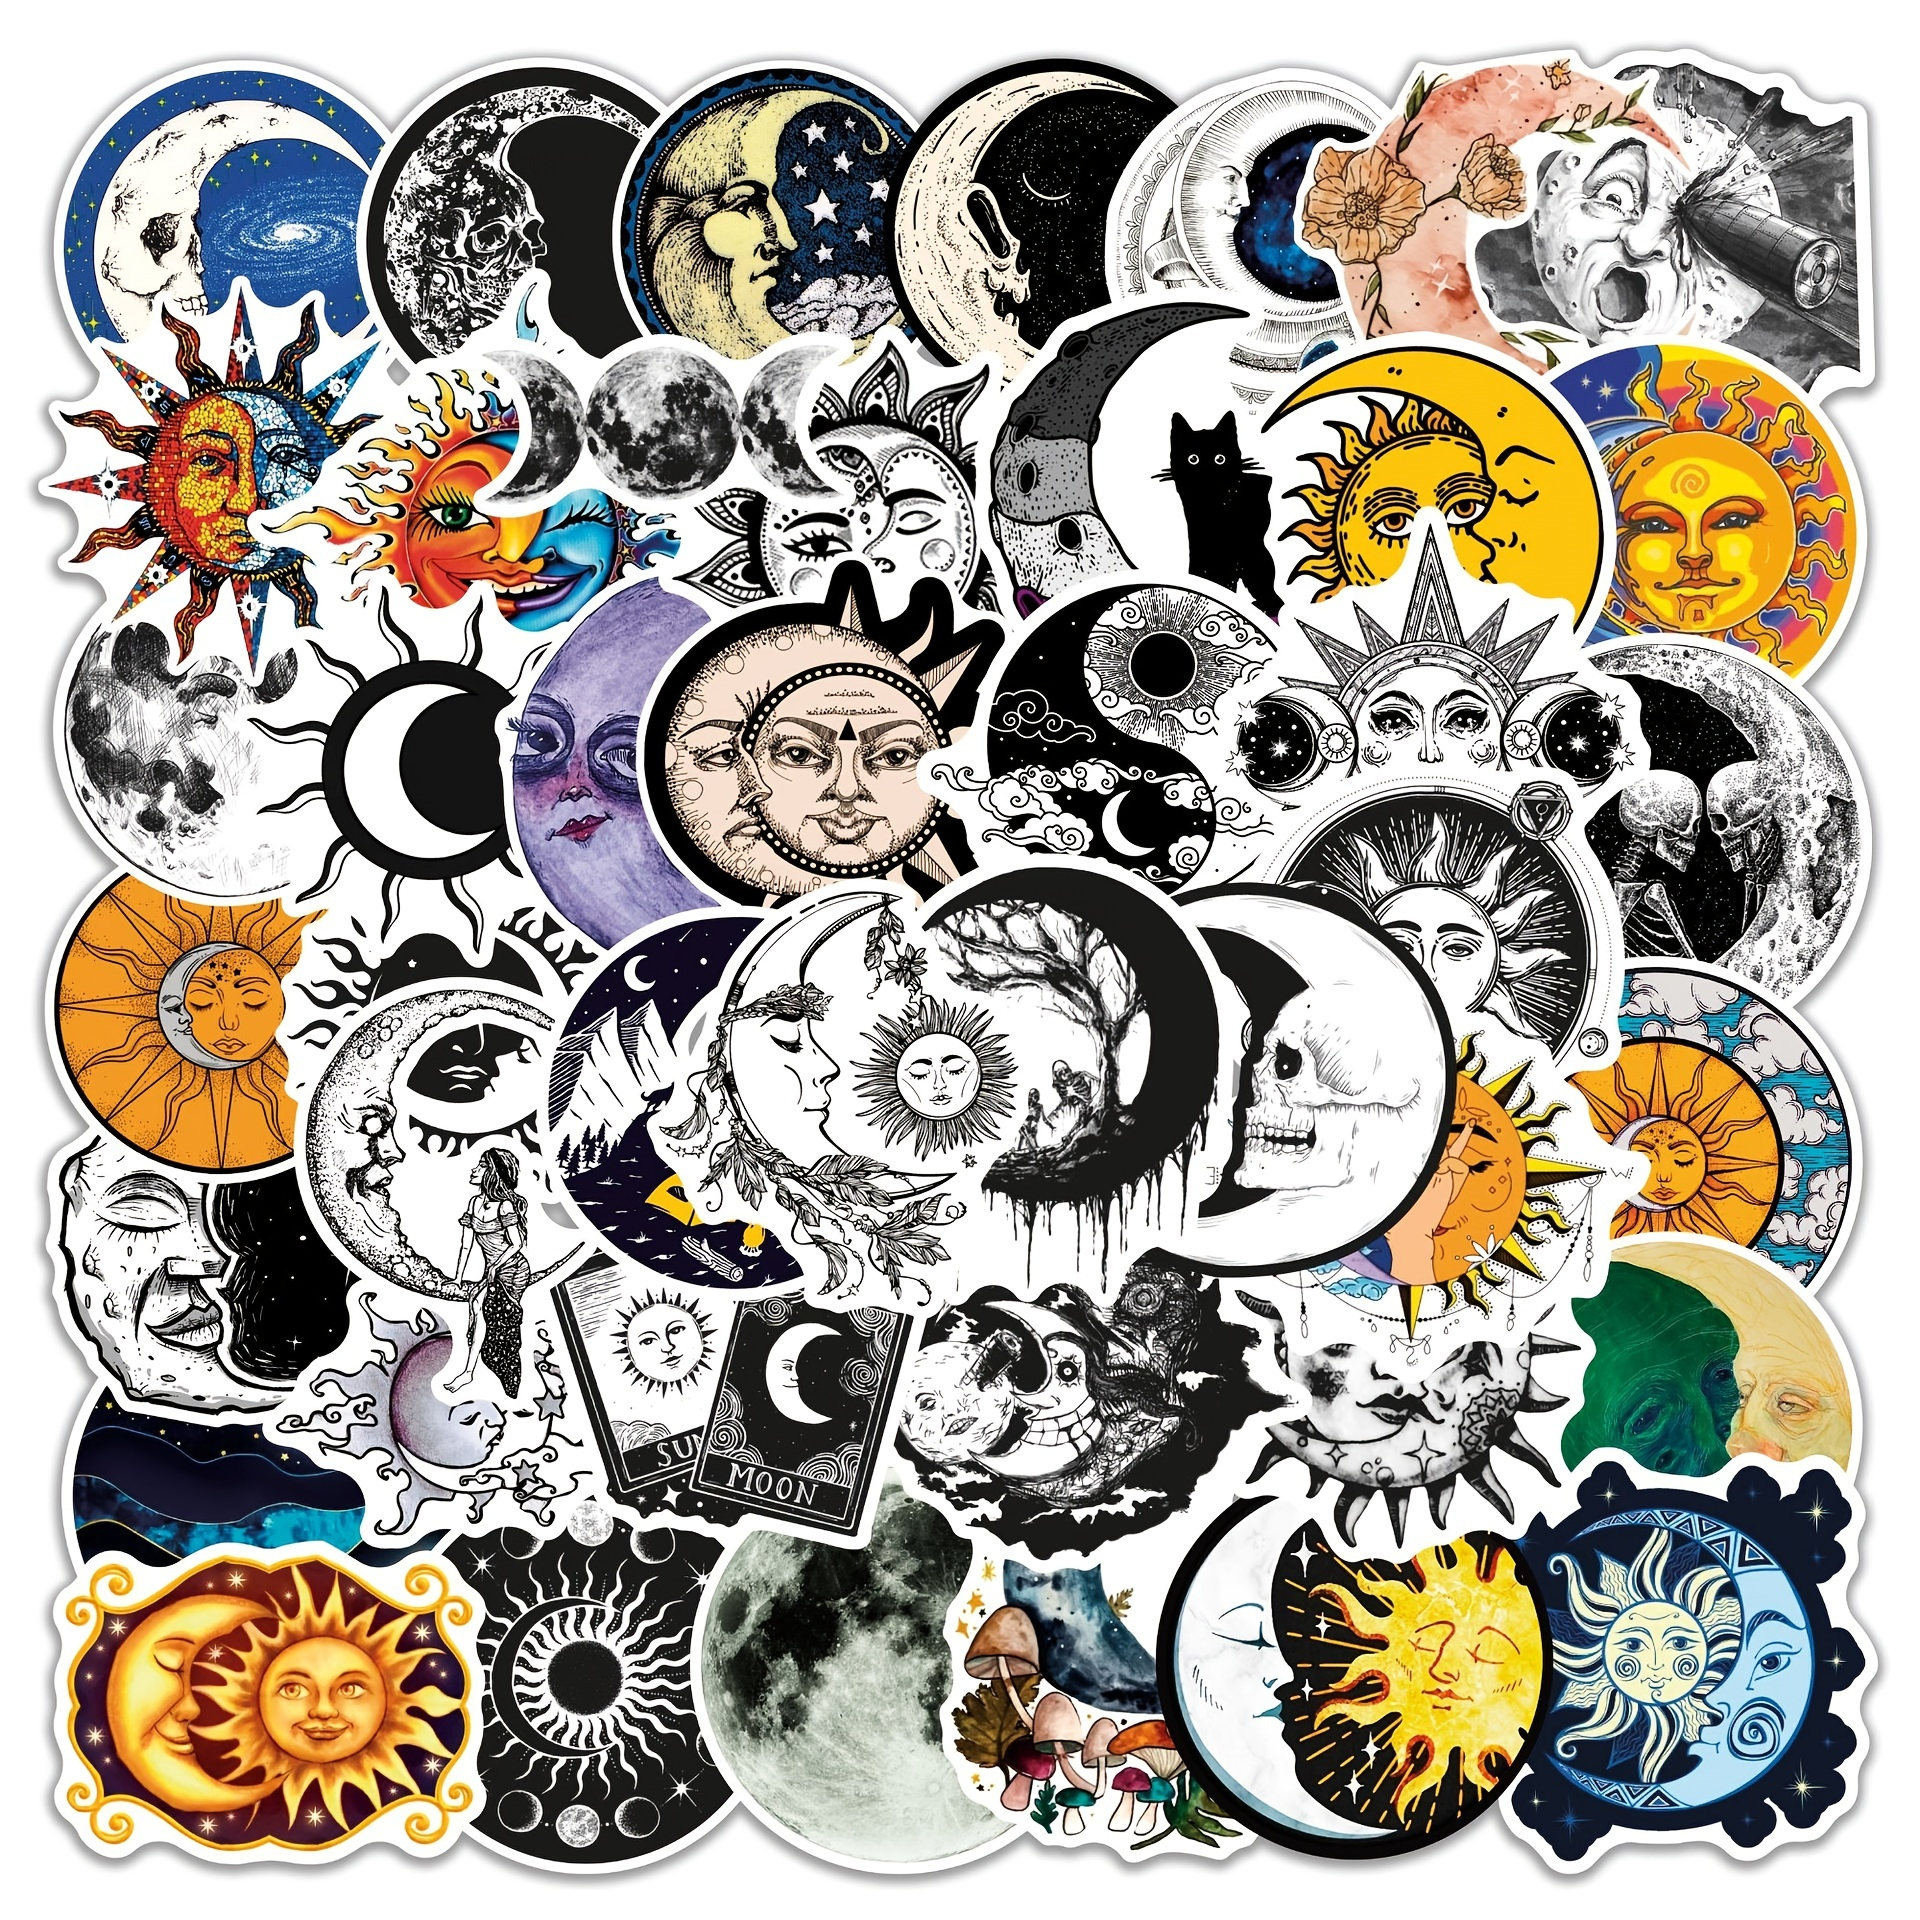 45 Gorgeous Sun and Moon Stickers Gothic Magical Moon Stickers Boho Sun  Stickers Great for Hydro Flask, Laptop, Phone 0158 